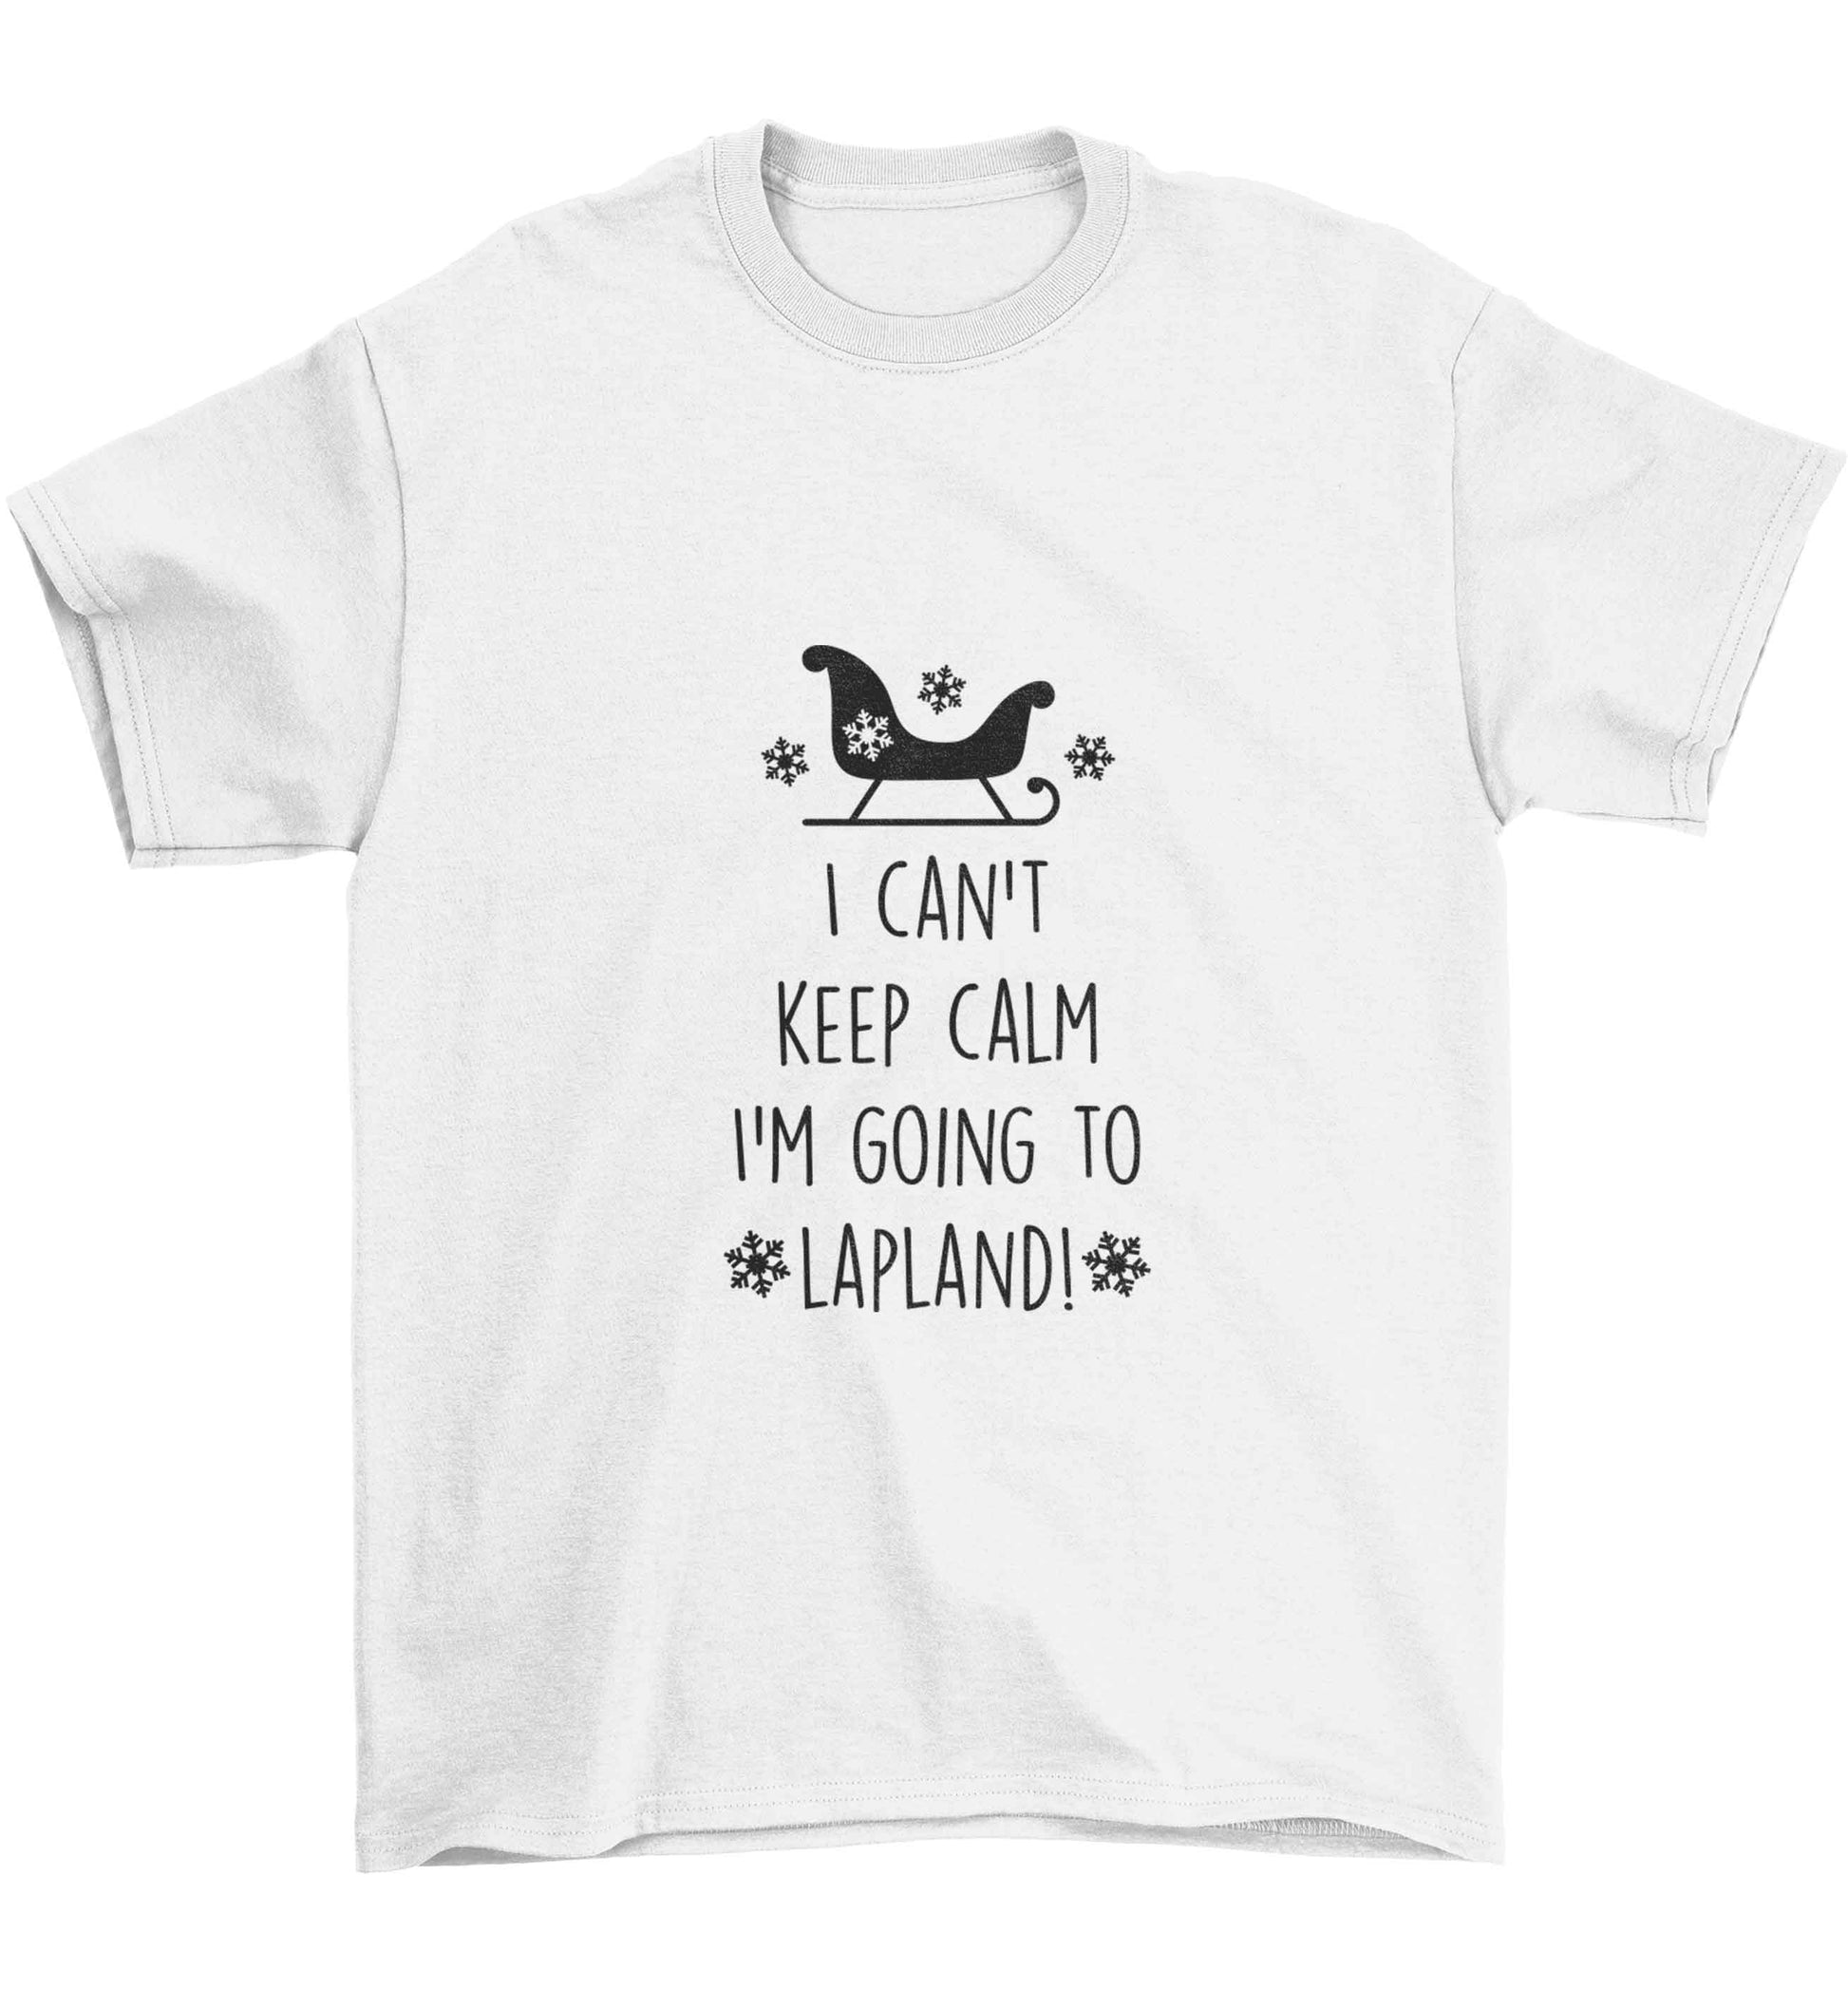 I can't keep calm I'm going to Lapland Children's white Tshirt 12-13 Years